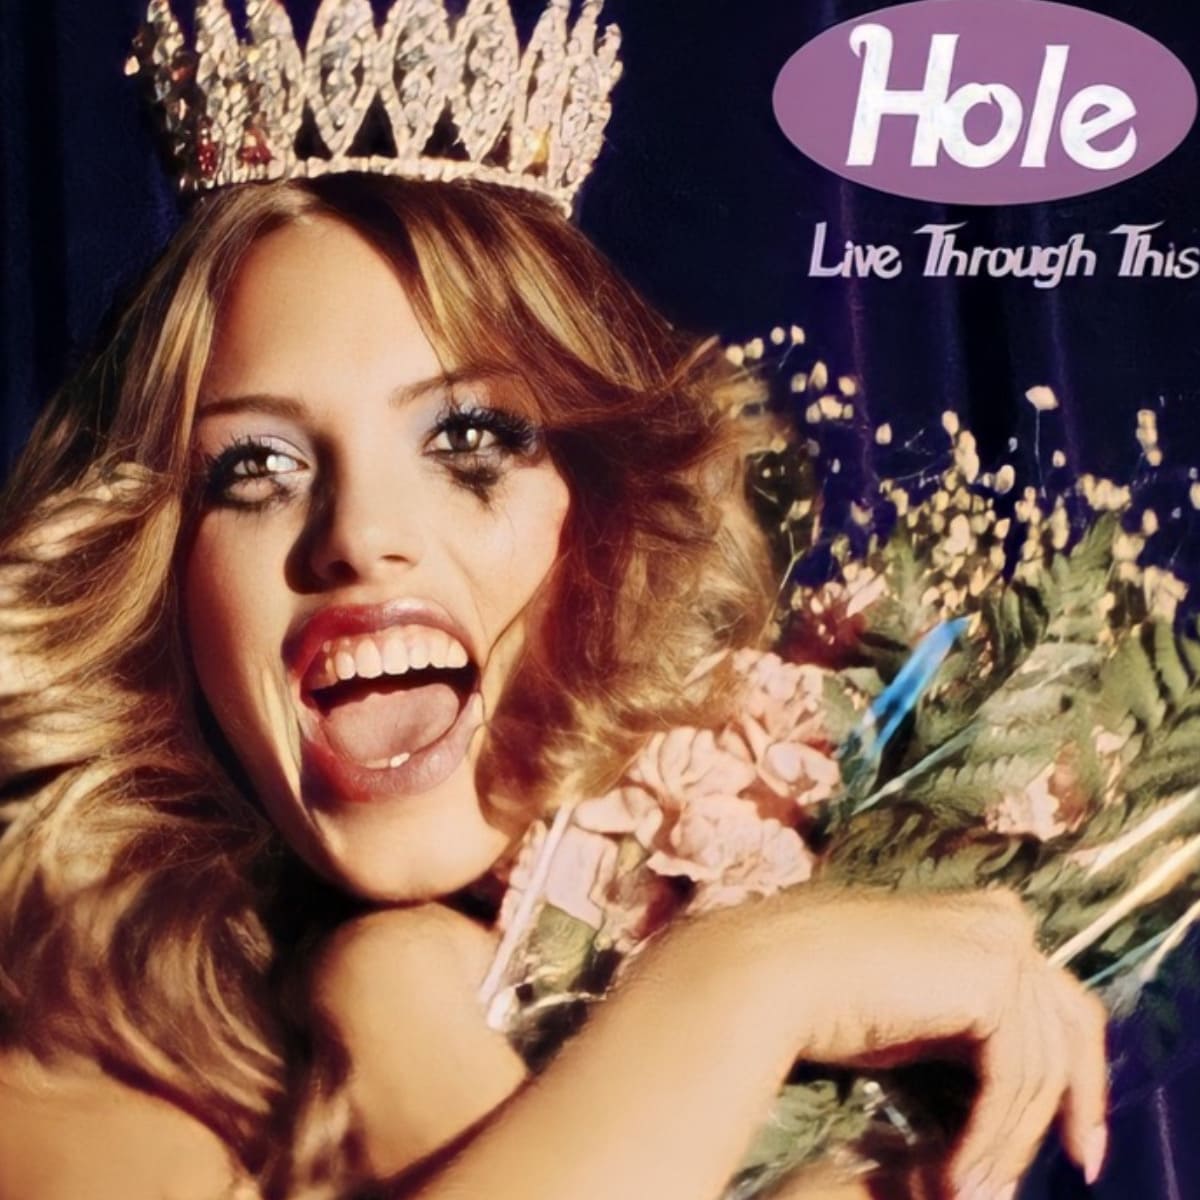 The cover of the album "Live Through This" by the band Hole